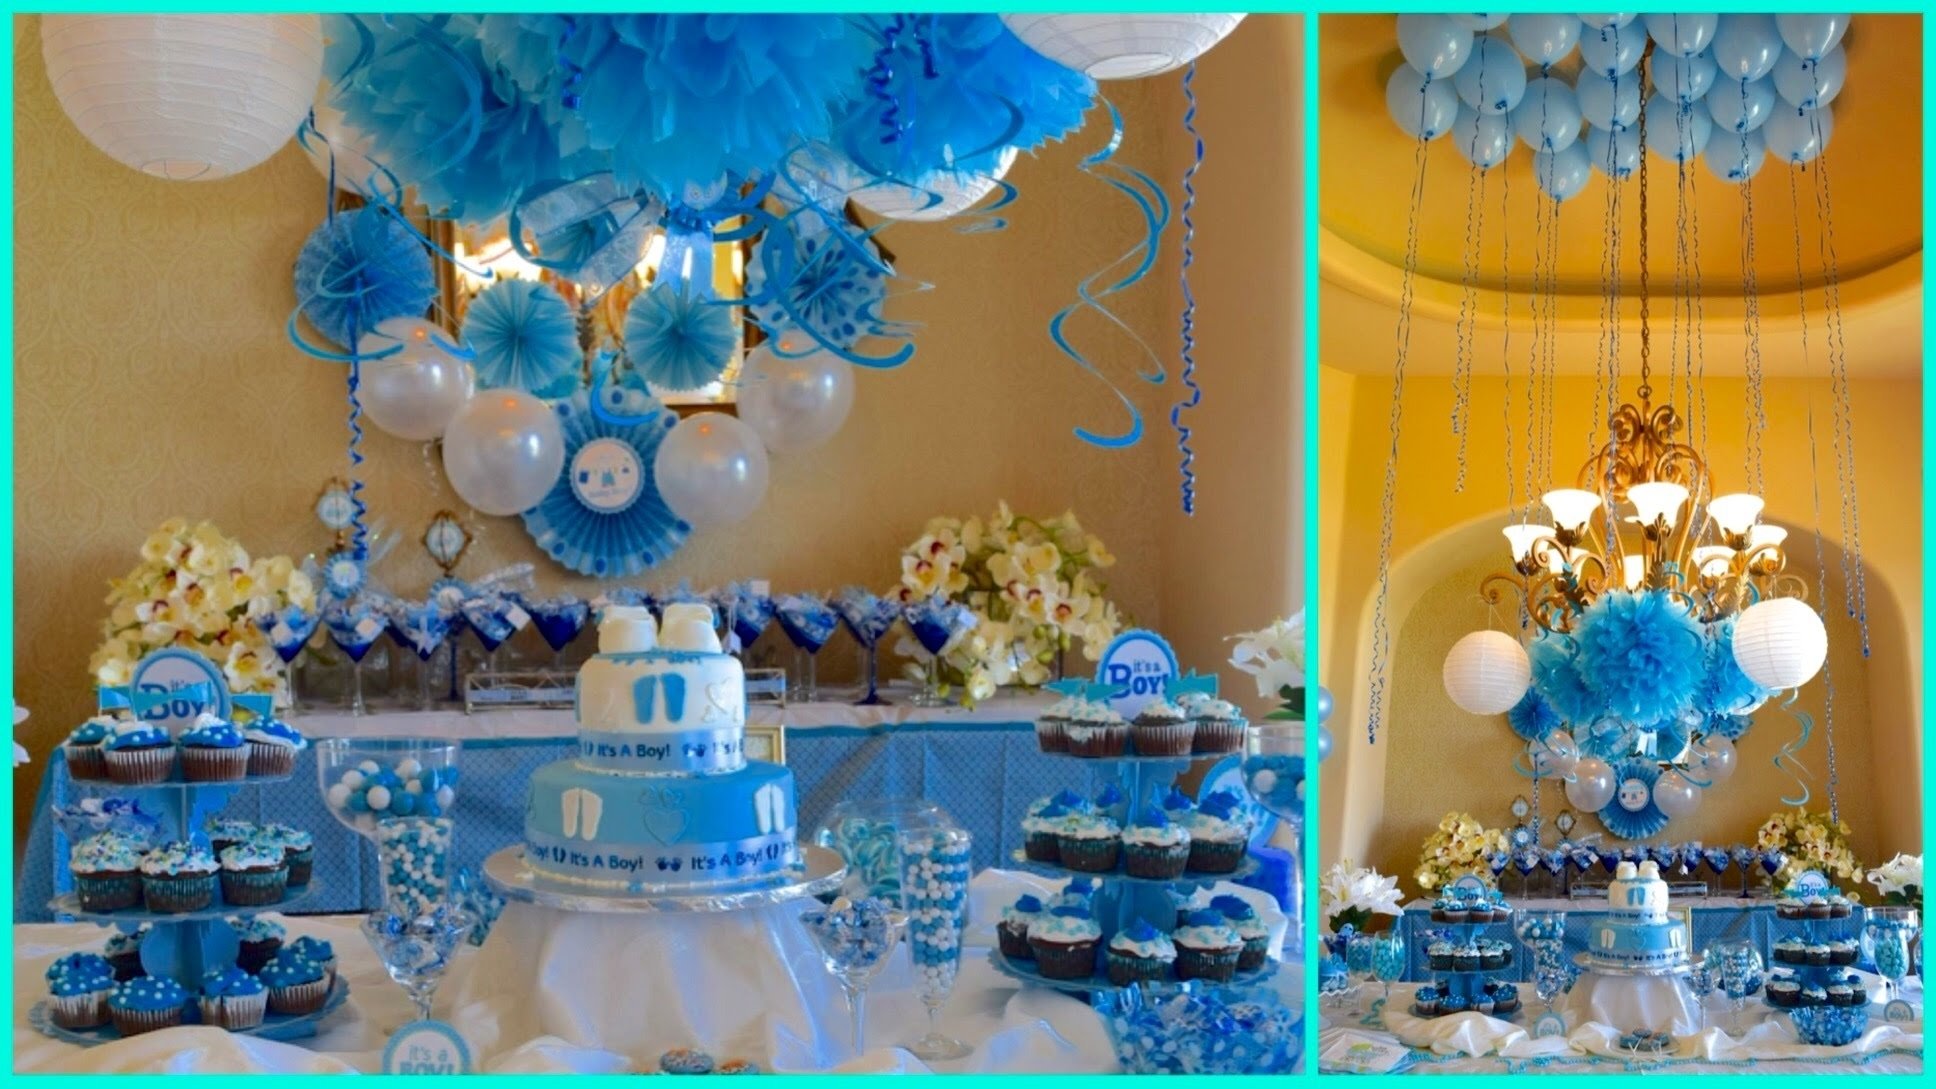 10 Ideal Baby Shower Theme Ideas For A Boy baby shower ideas for boy blue theme youtube 14 2022